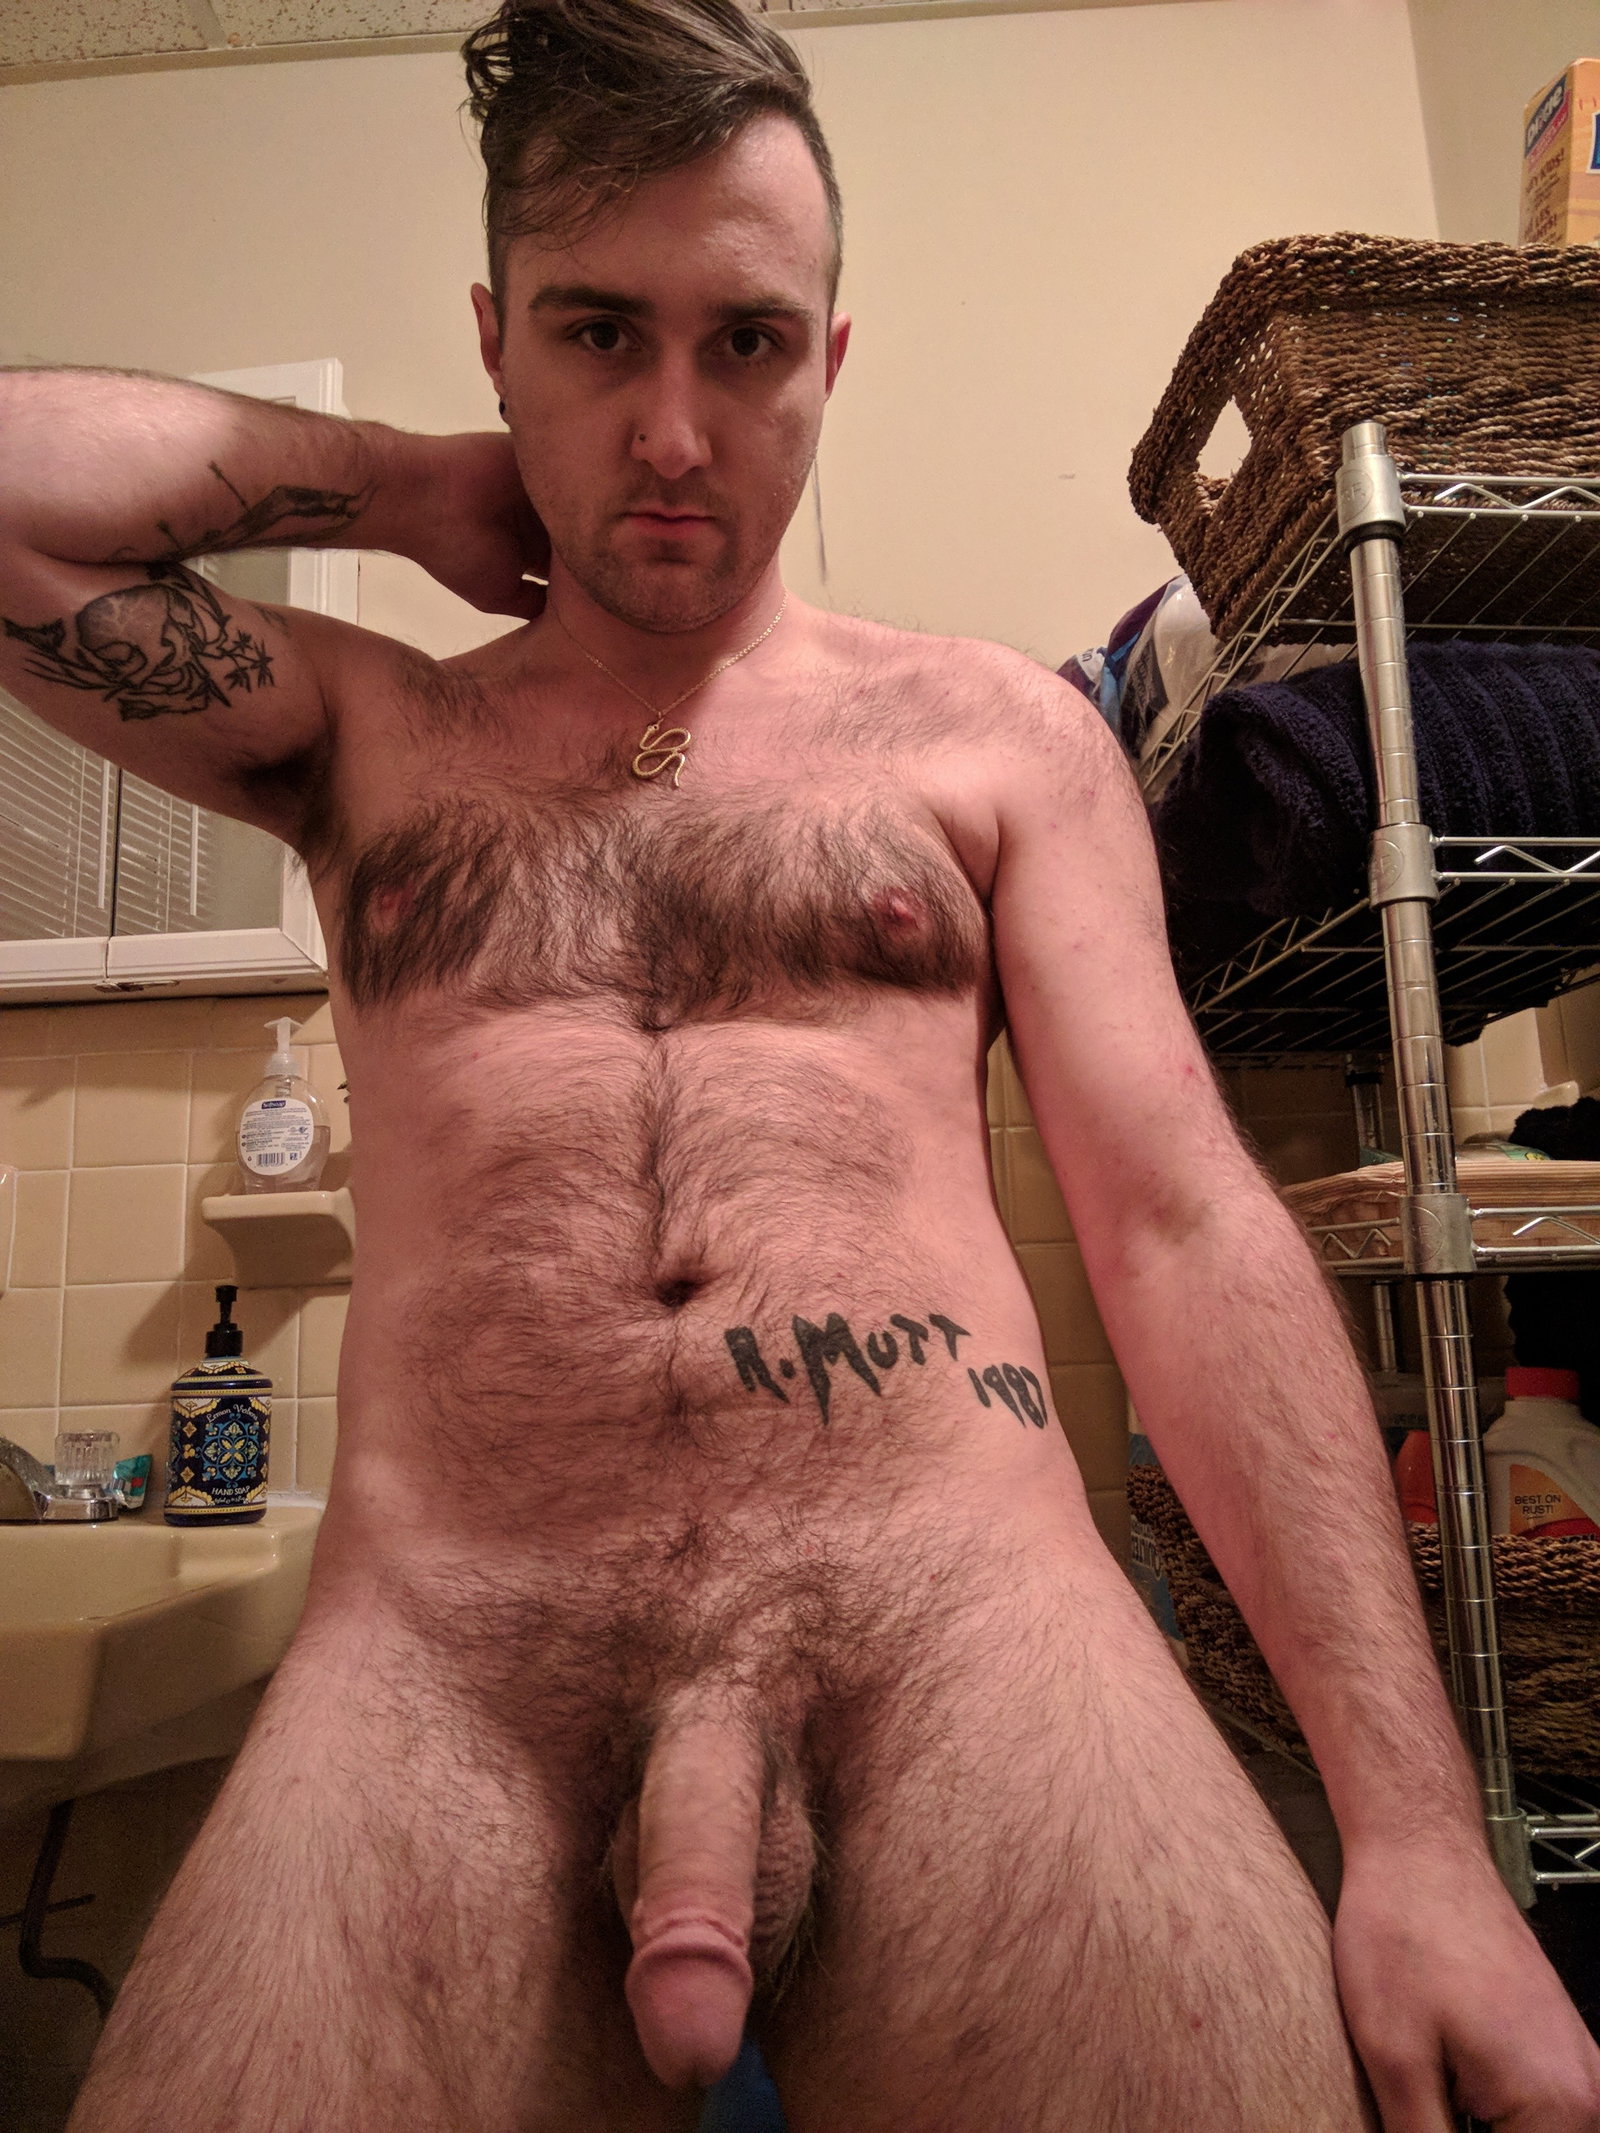 Photo by Smitty with the username @Resol702,  May 2, 2019 at 3:45 PM. The post is about the topic Gay Hairy Men